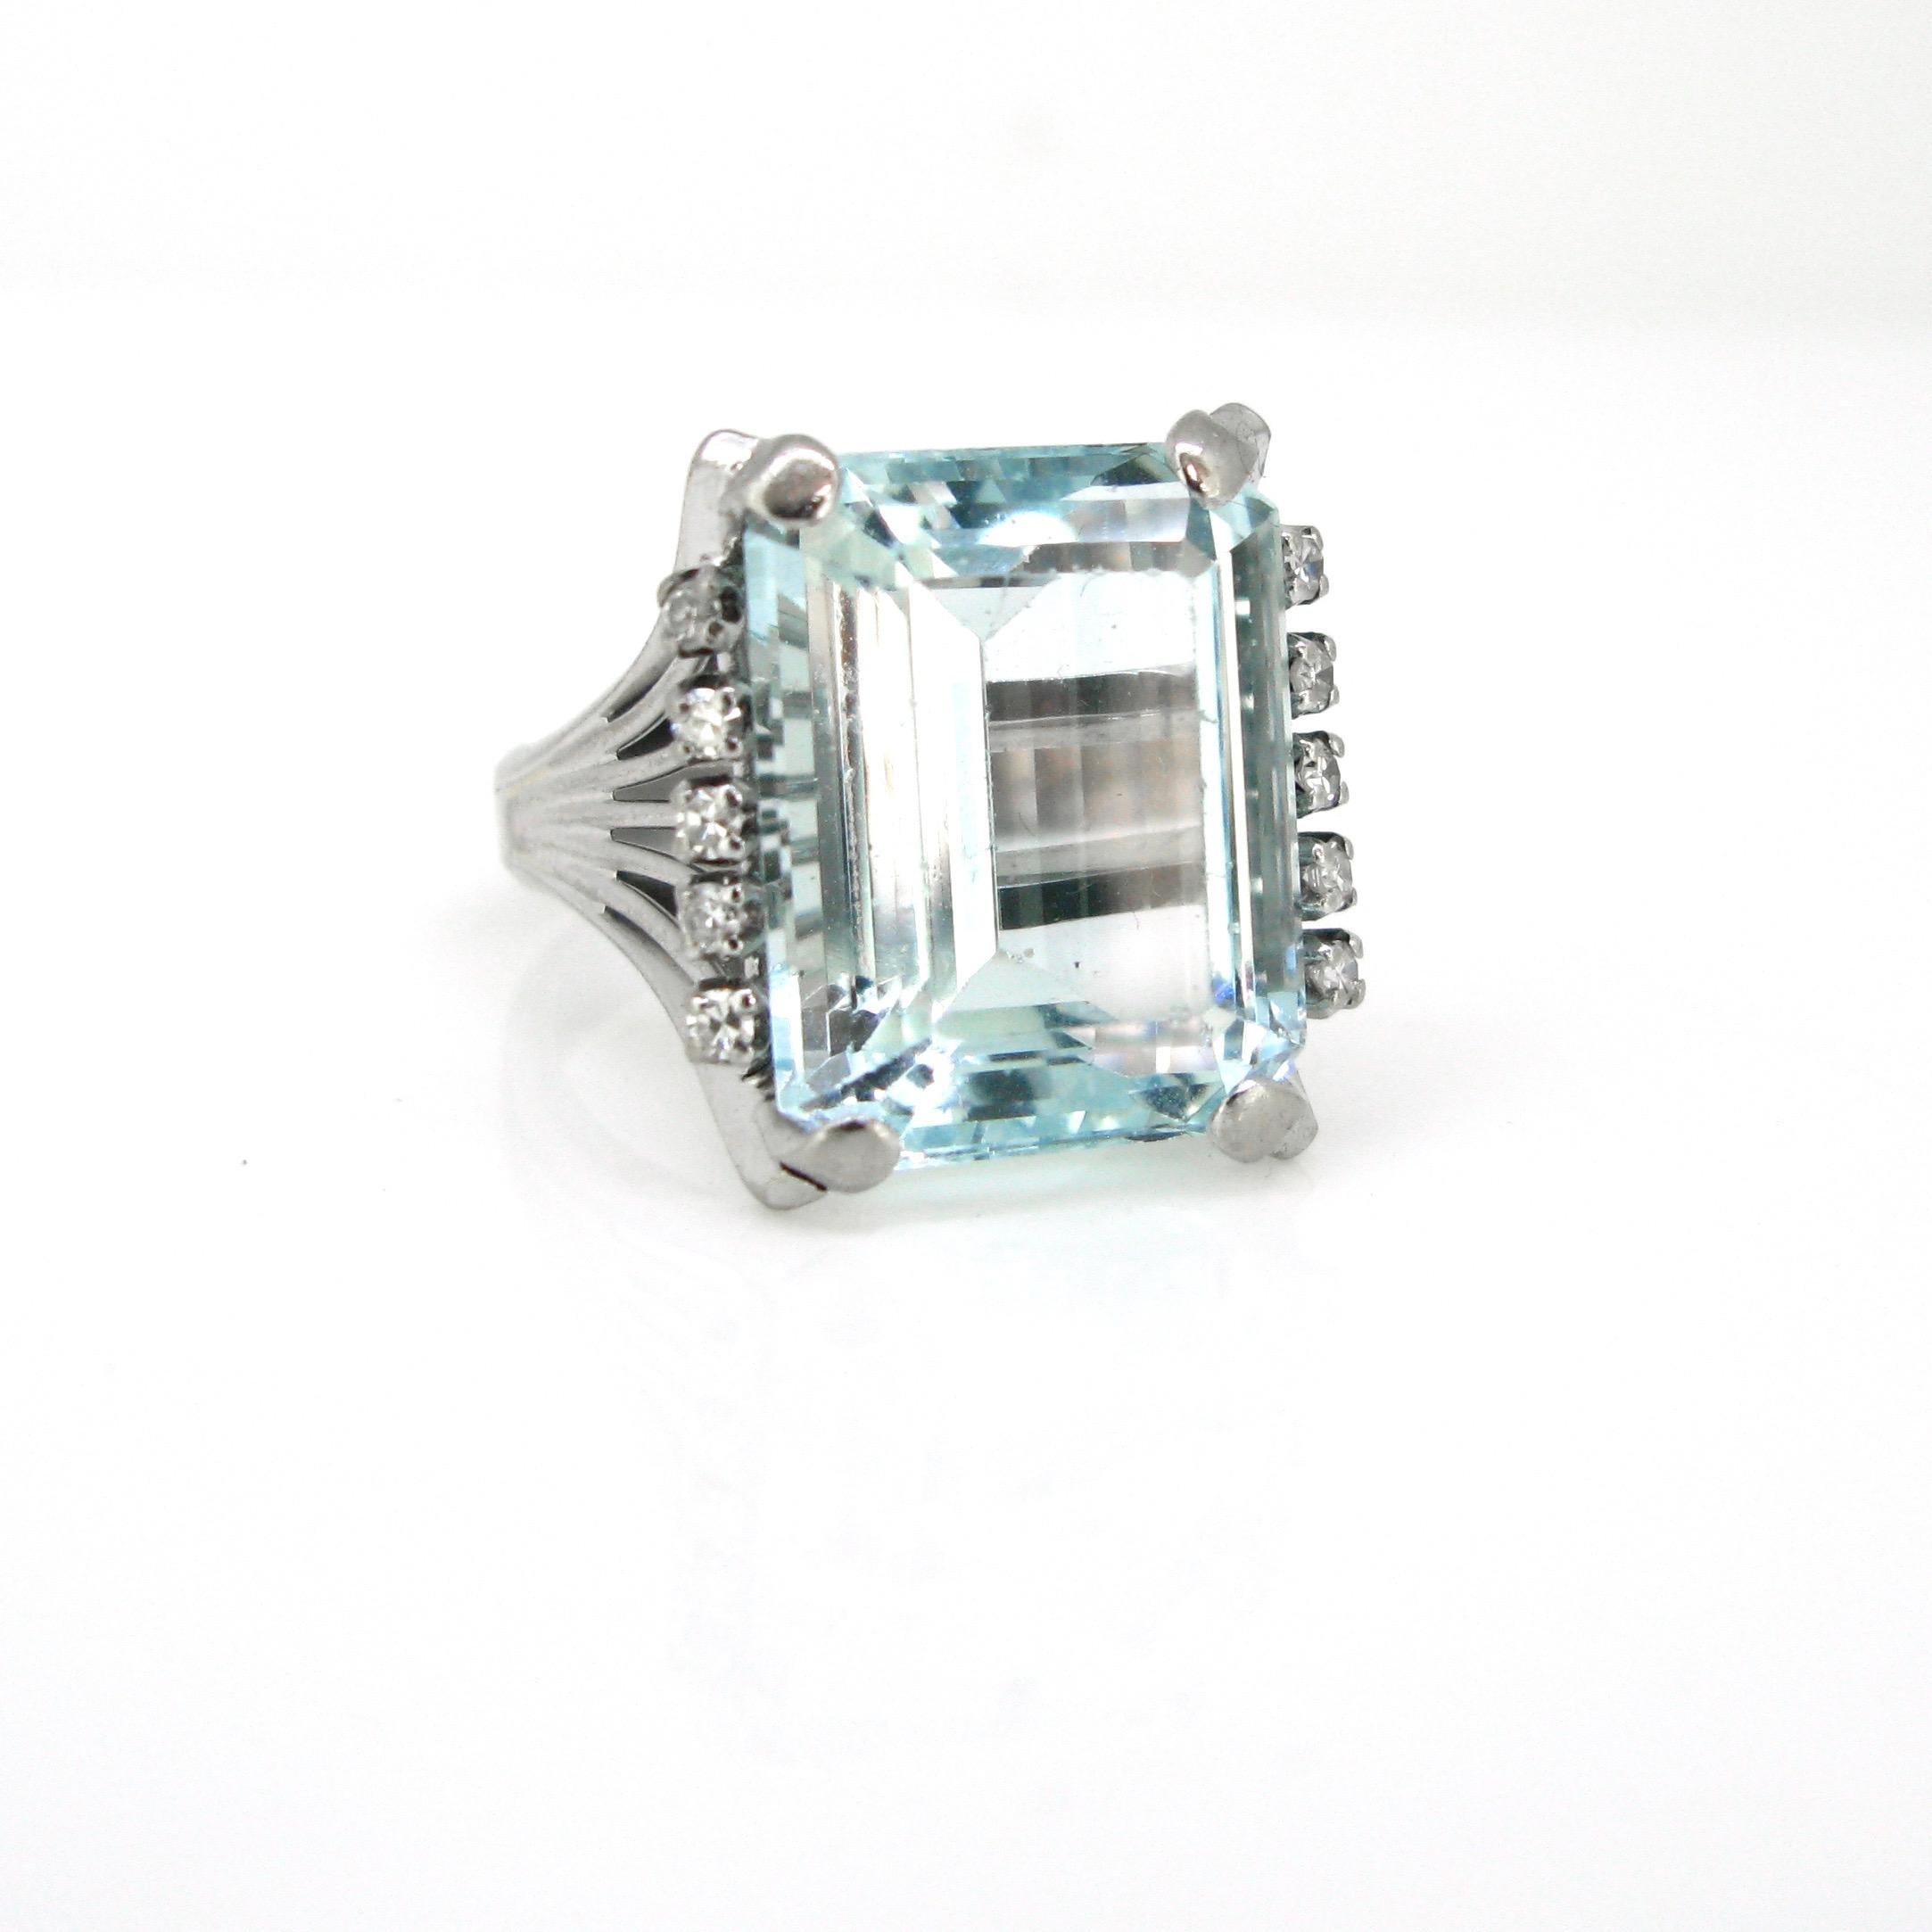 This Cocktail ring is made in 18kt white gold. It is set with an eye clean aquamarine weighing around 14ct. It is shouldered with 5 single cut diamonds on each side The ring has been controlled with the French hallmark: the owl. Aquamarine